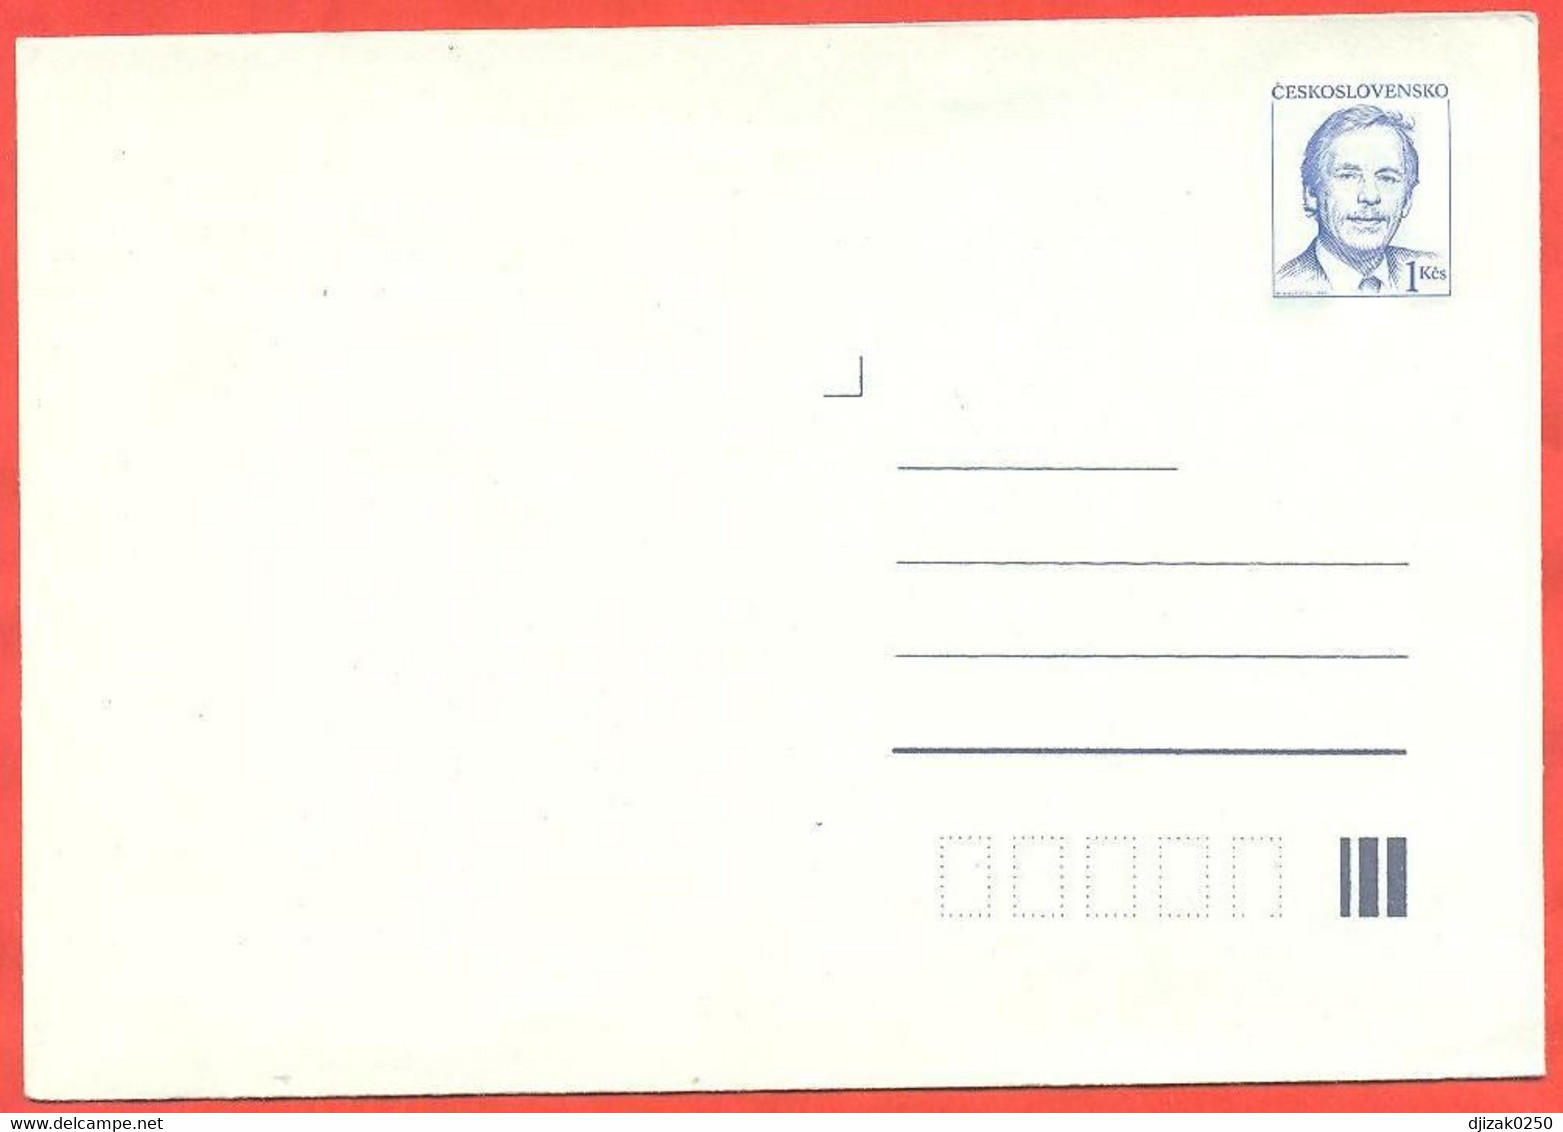 Czechoslovakia 1990. The Envelope With Printed Stamp. Unused. - Buste